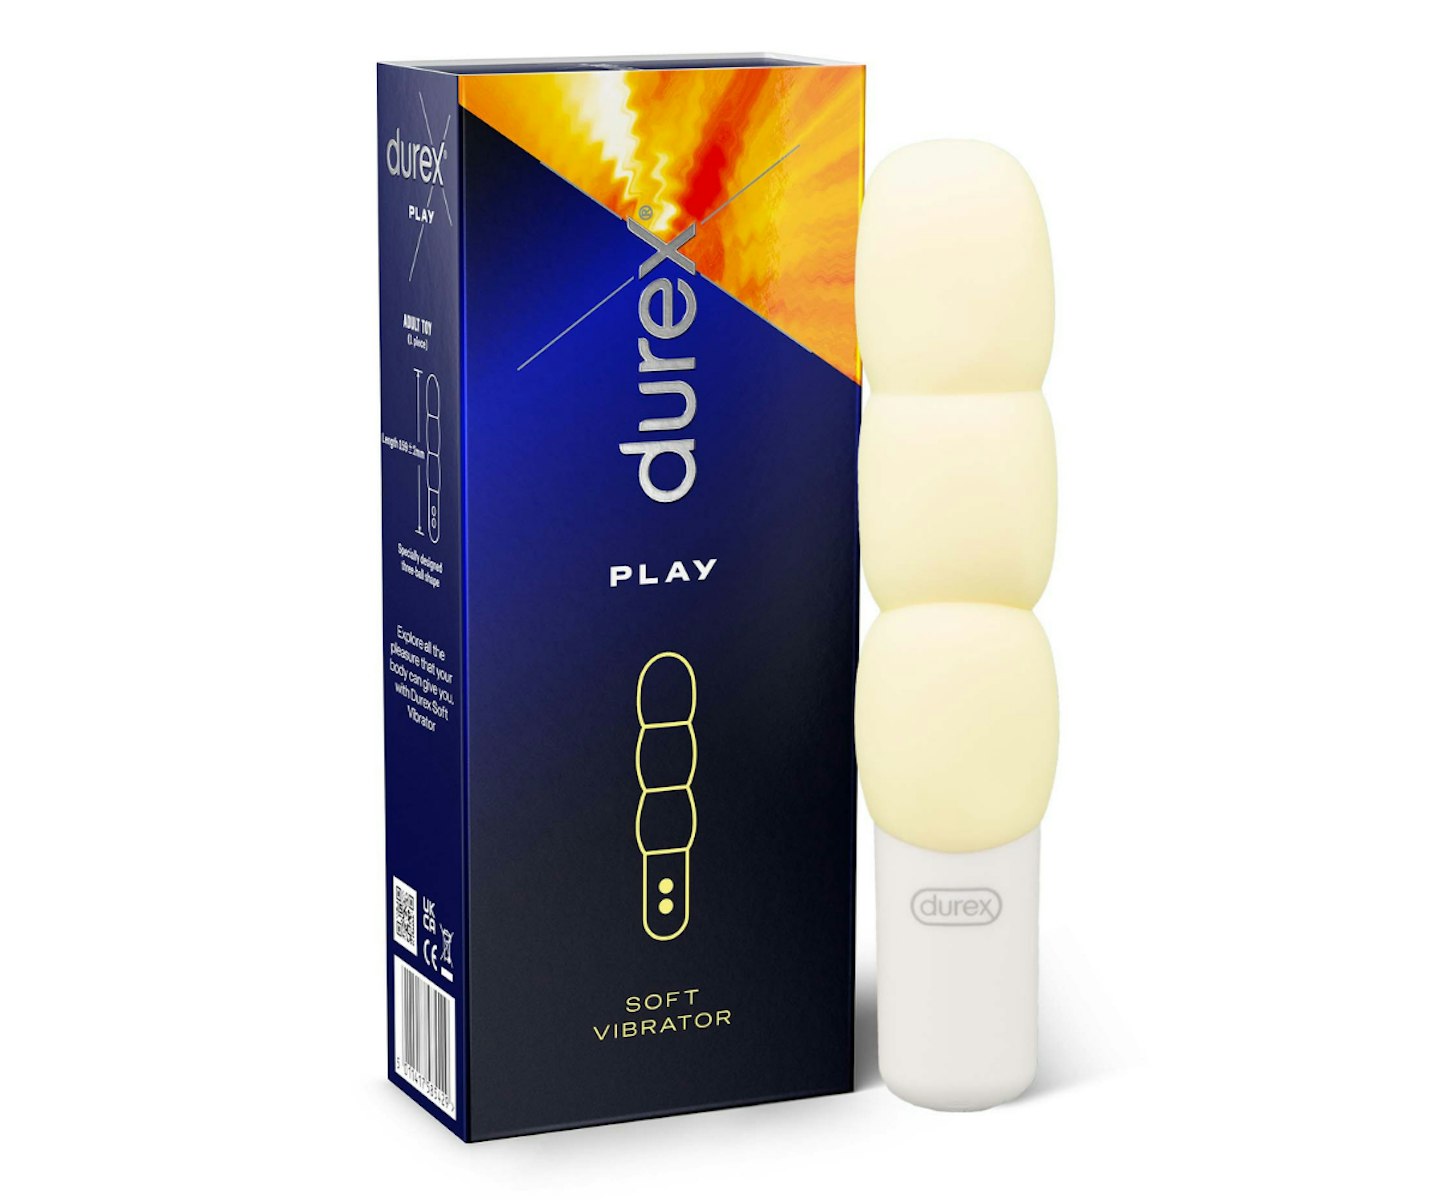 Durex - Soft Vibrator, USB Rechargeable and Waterproof Sex Toy